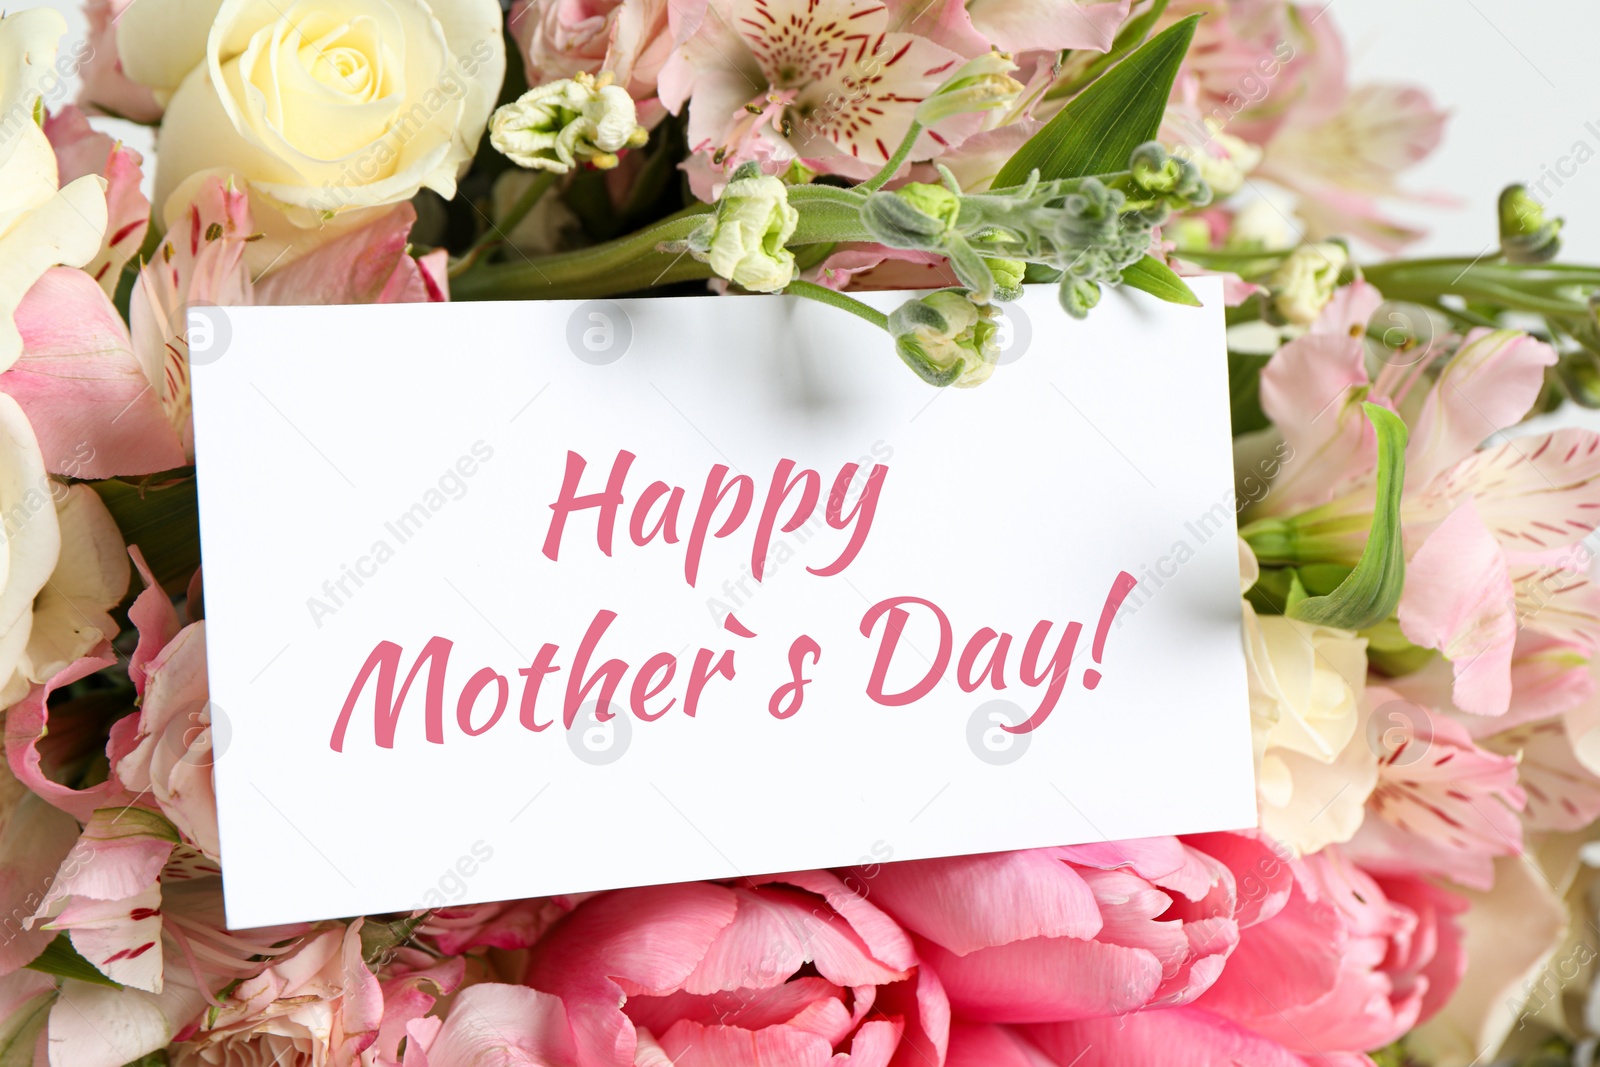 Image of Happy Mother's Day greeting card and beautiful flowers